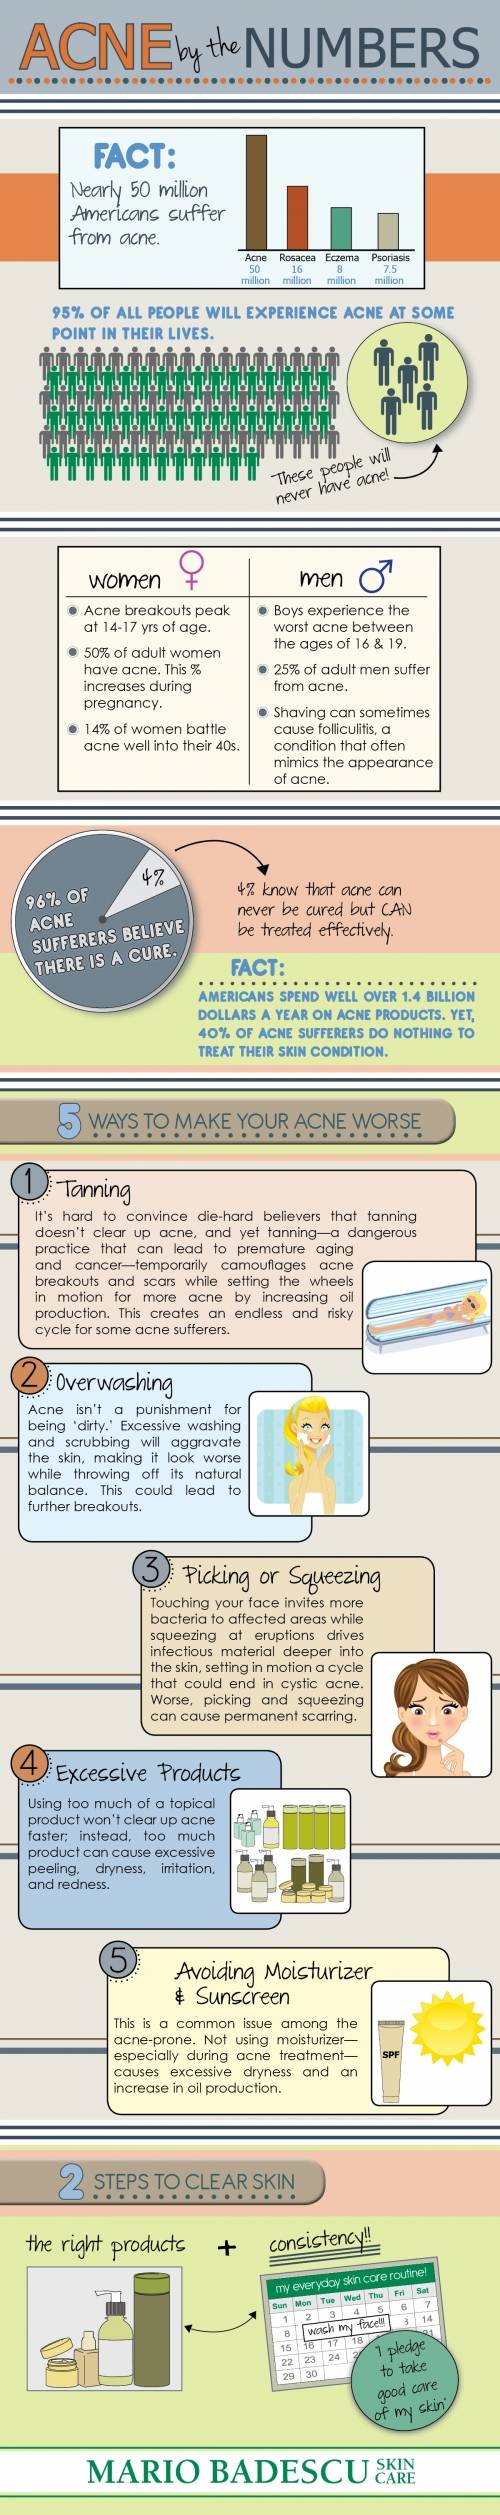 5 things that make acne worse